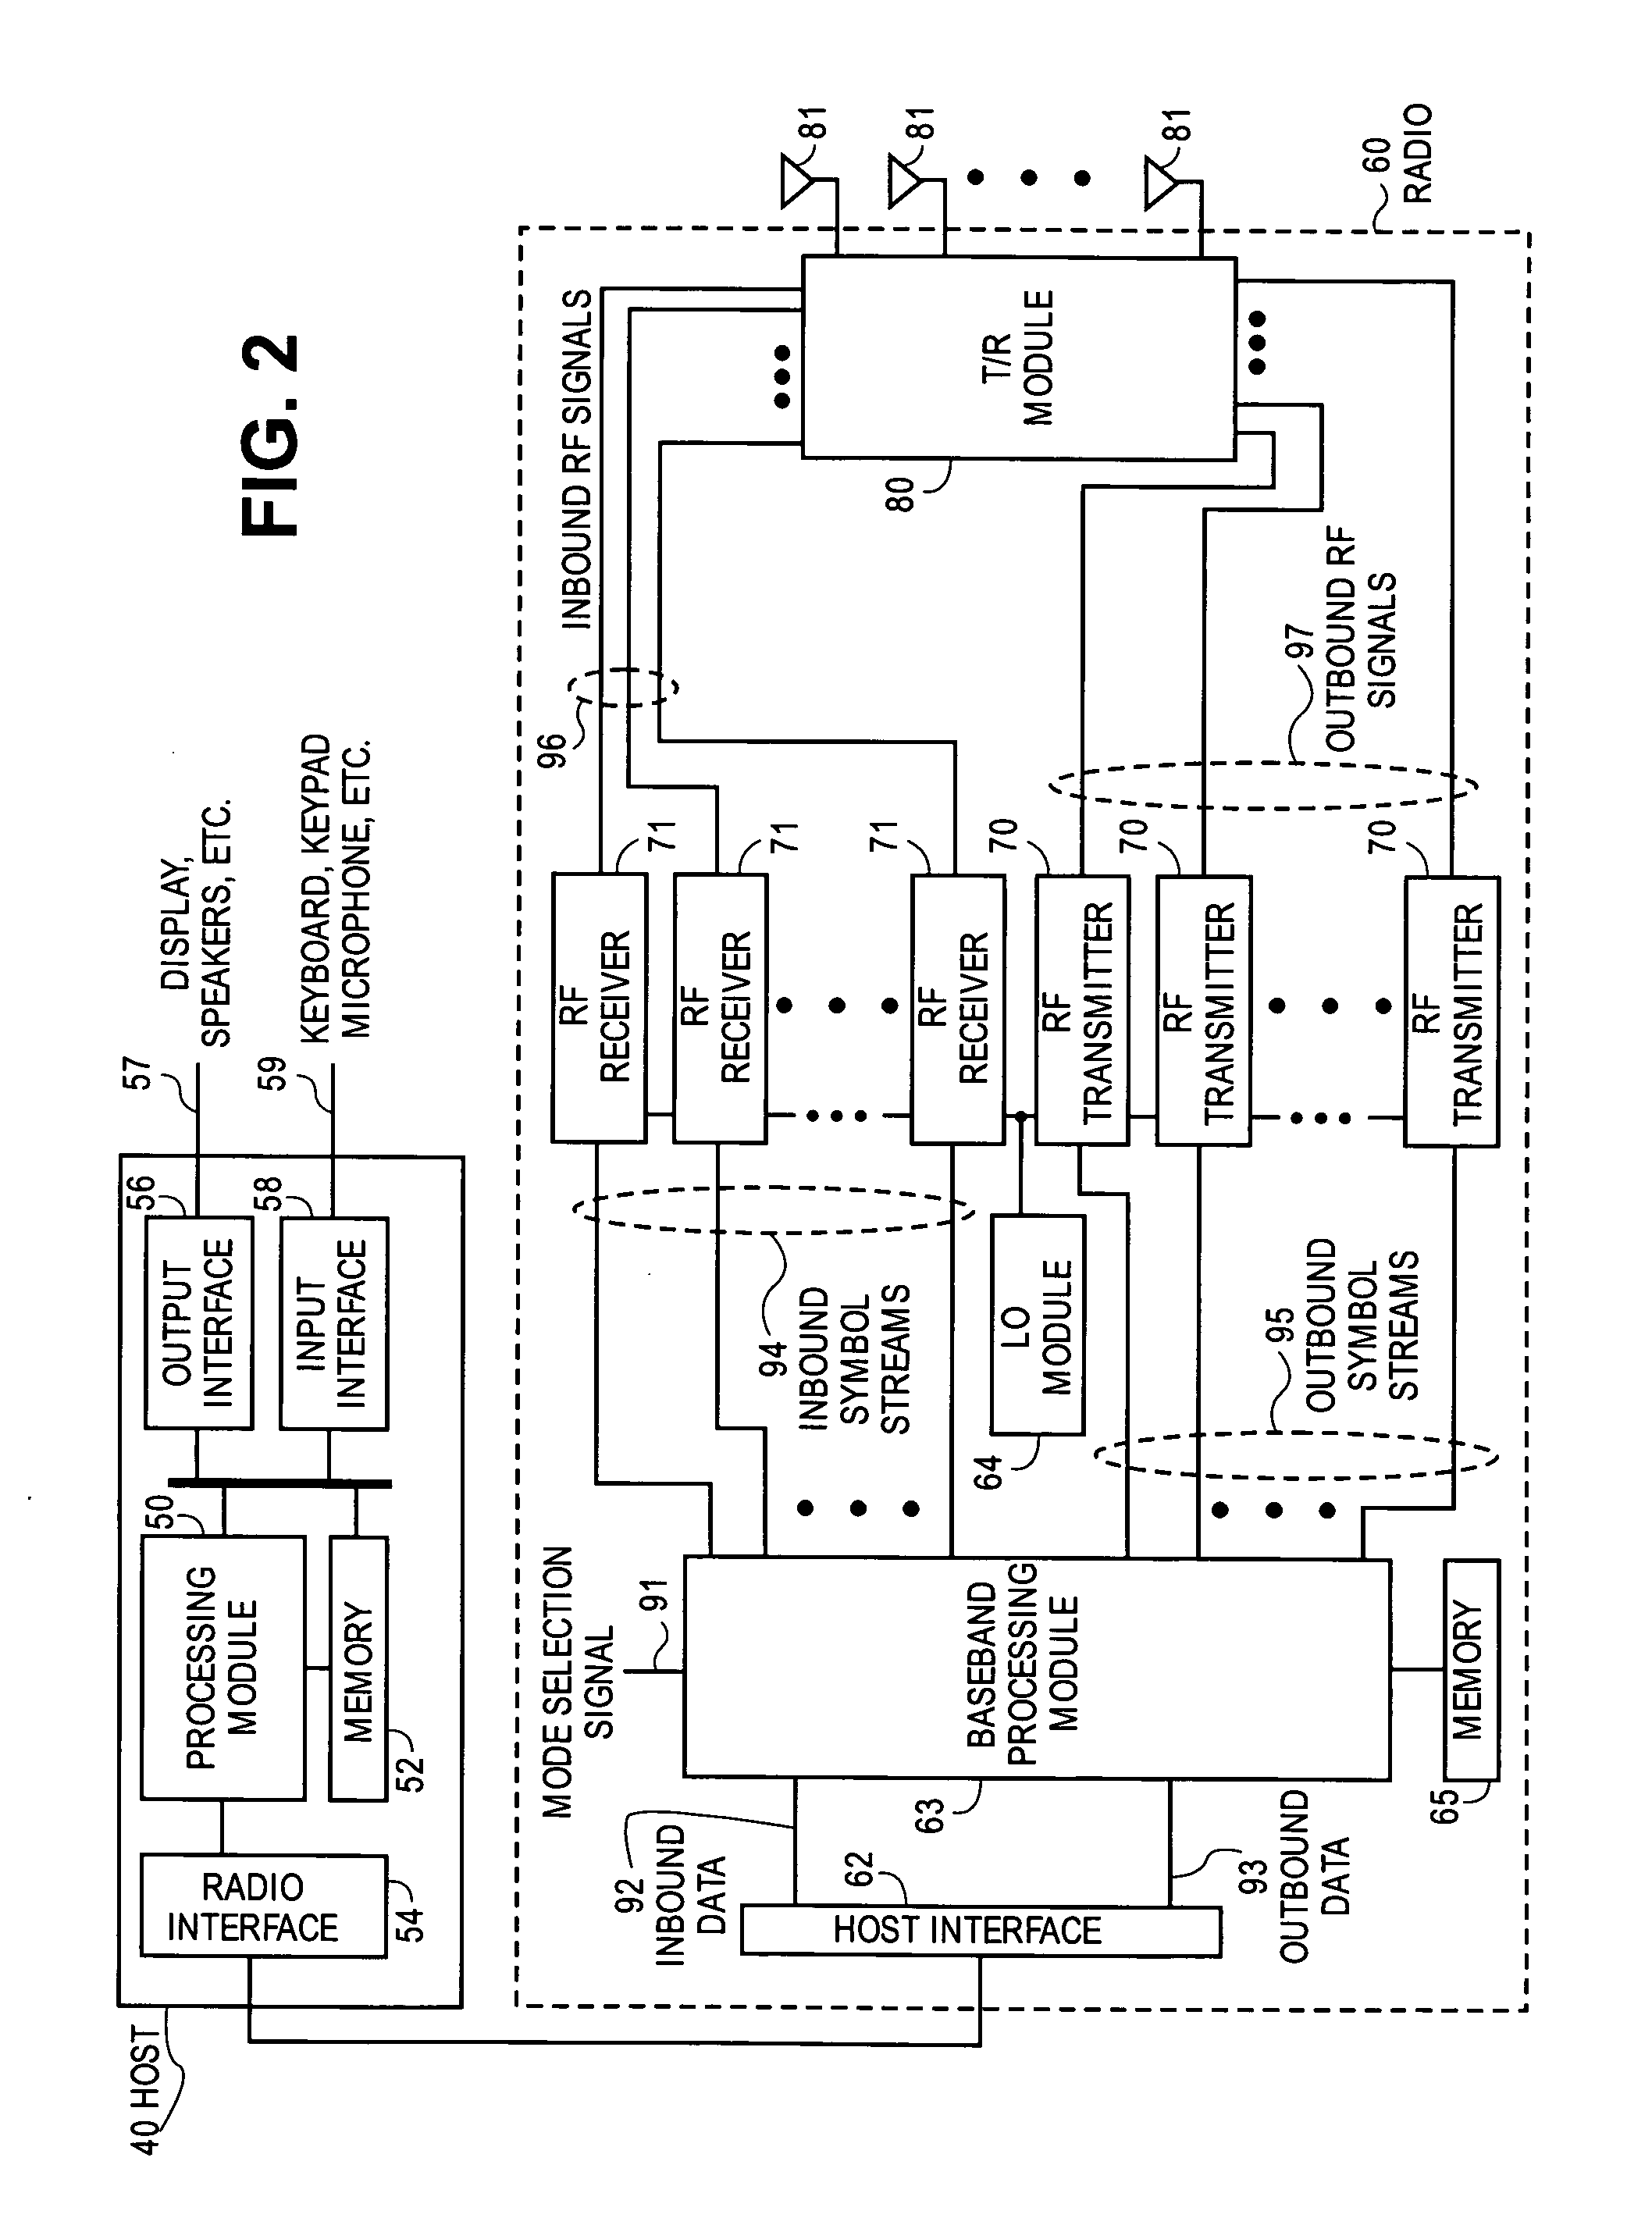 MIMO channel estimation in presence of sampling frequency offset